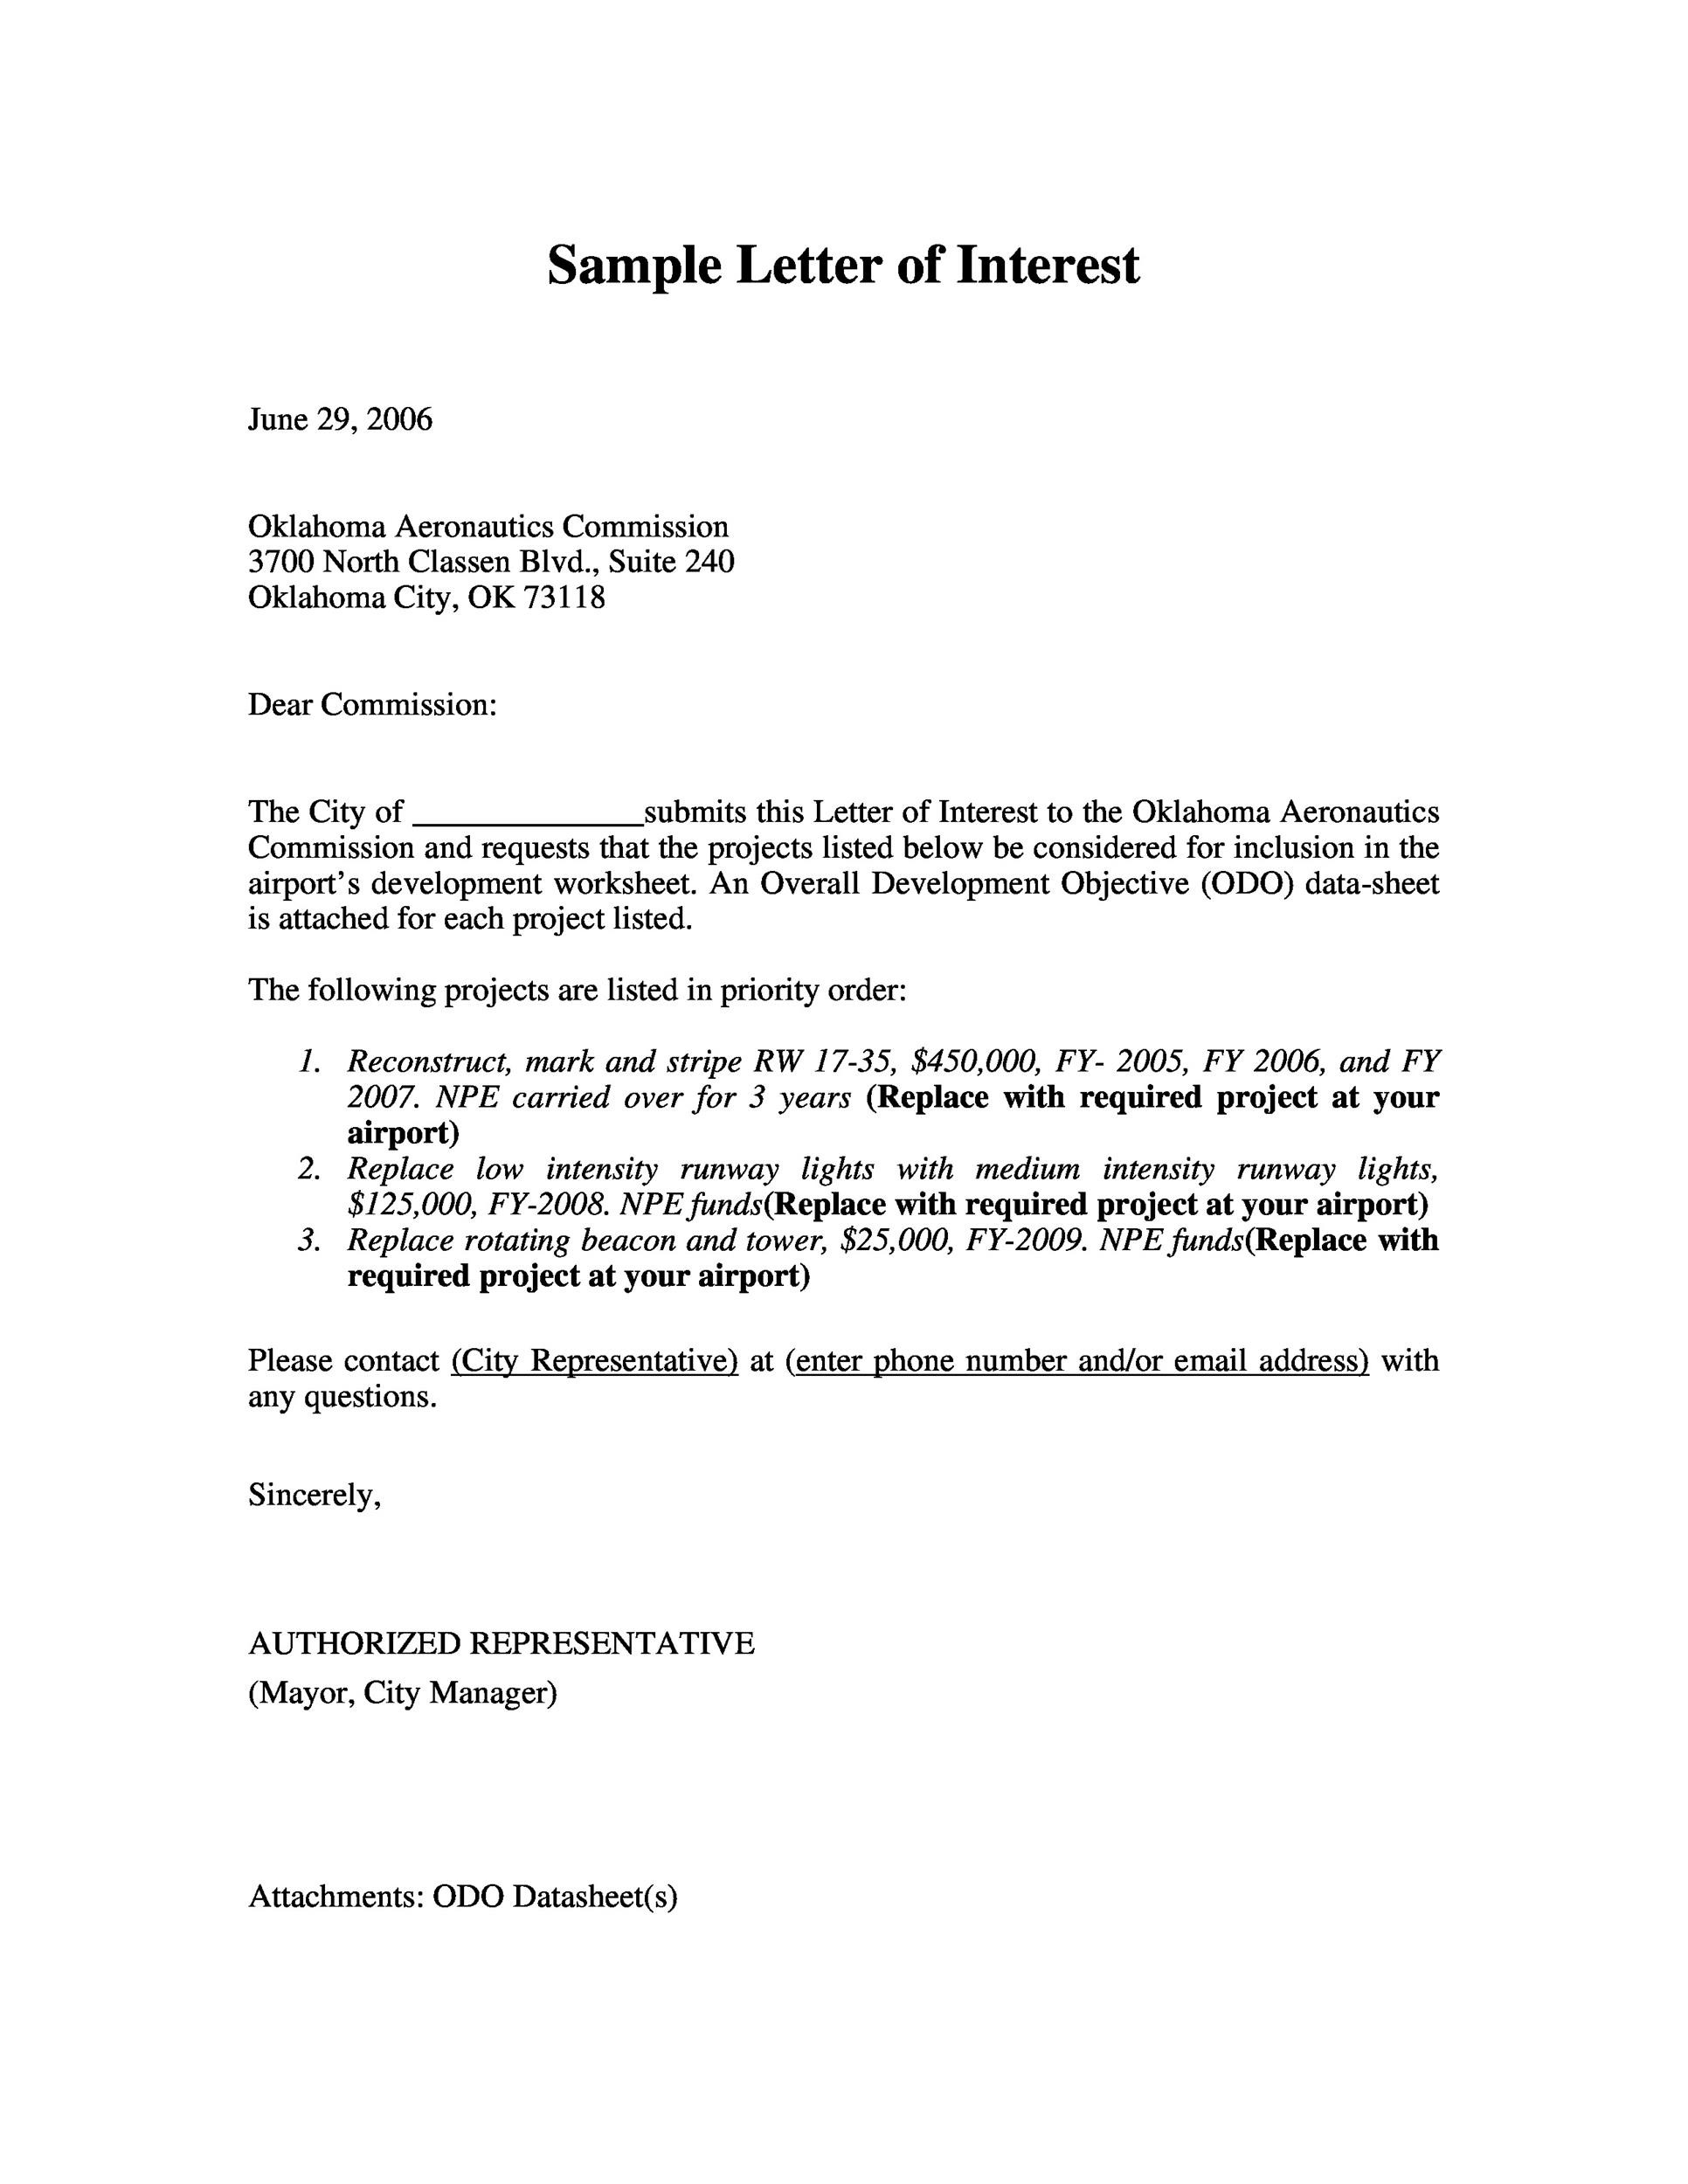 How to Write a Teacher Letter of Interest